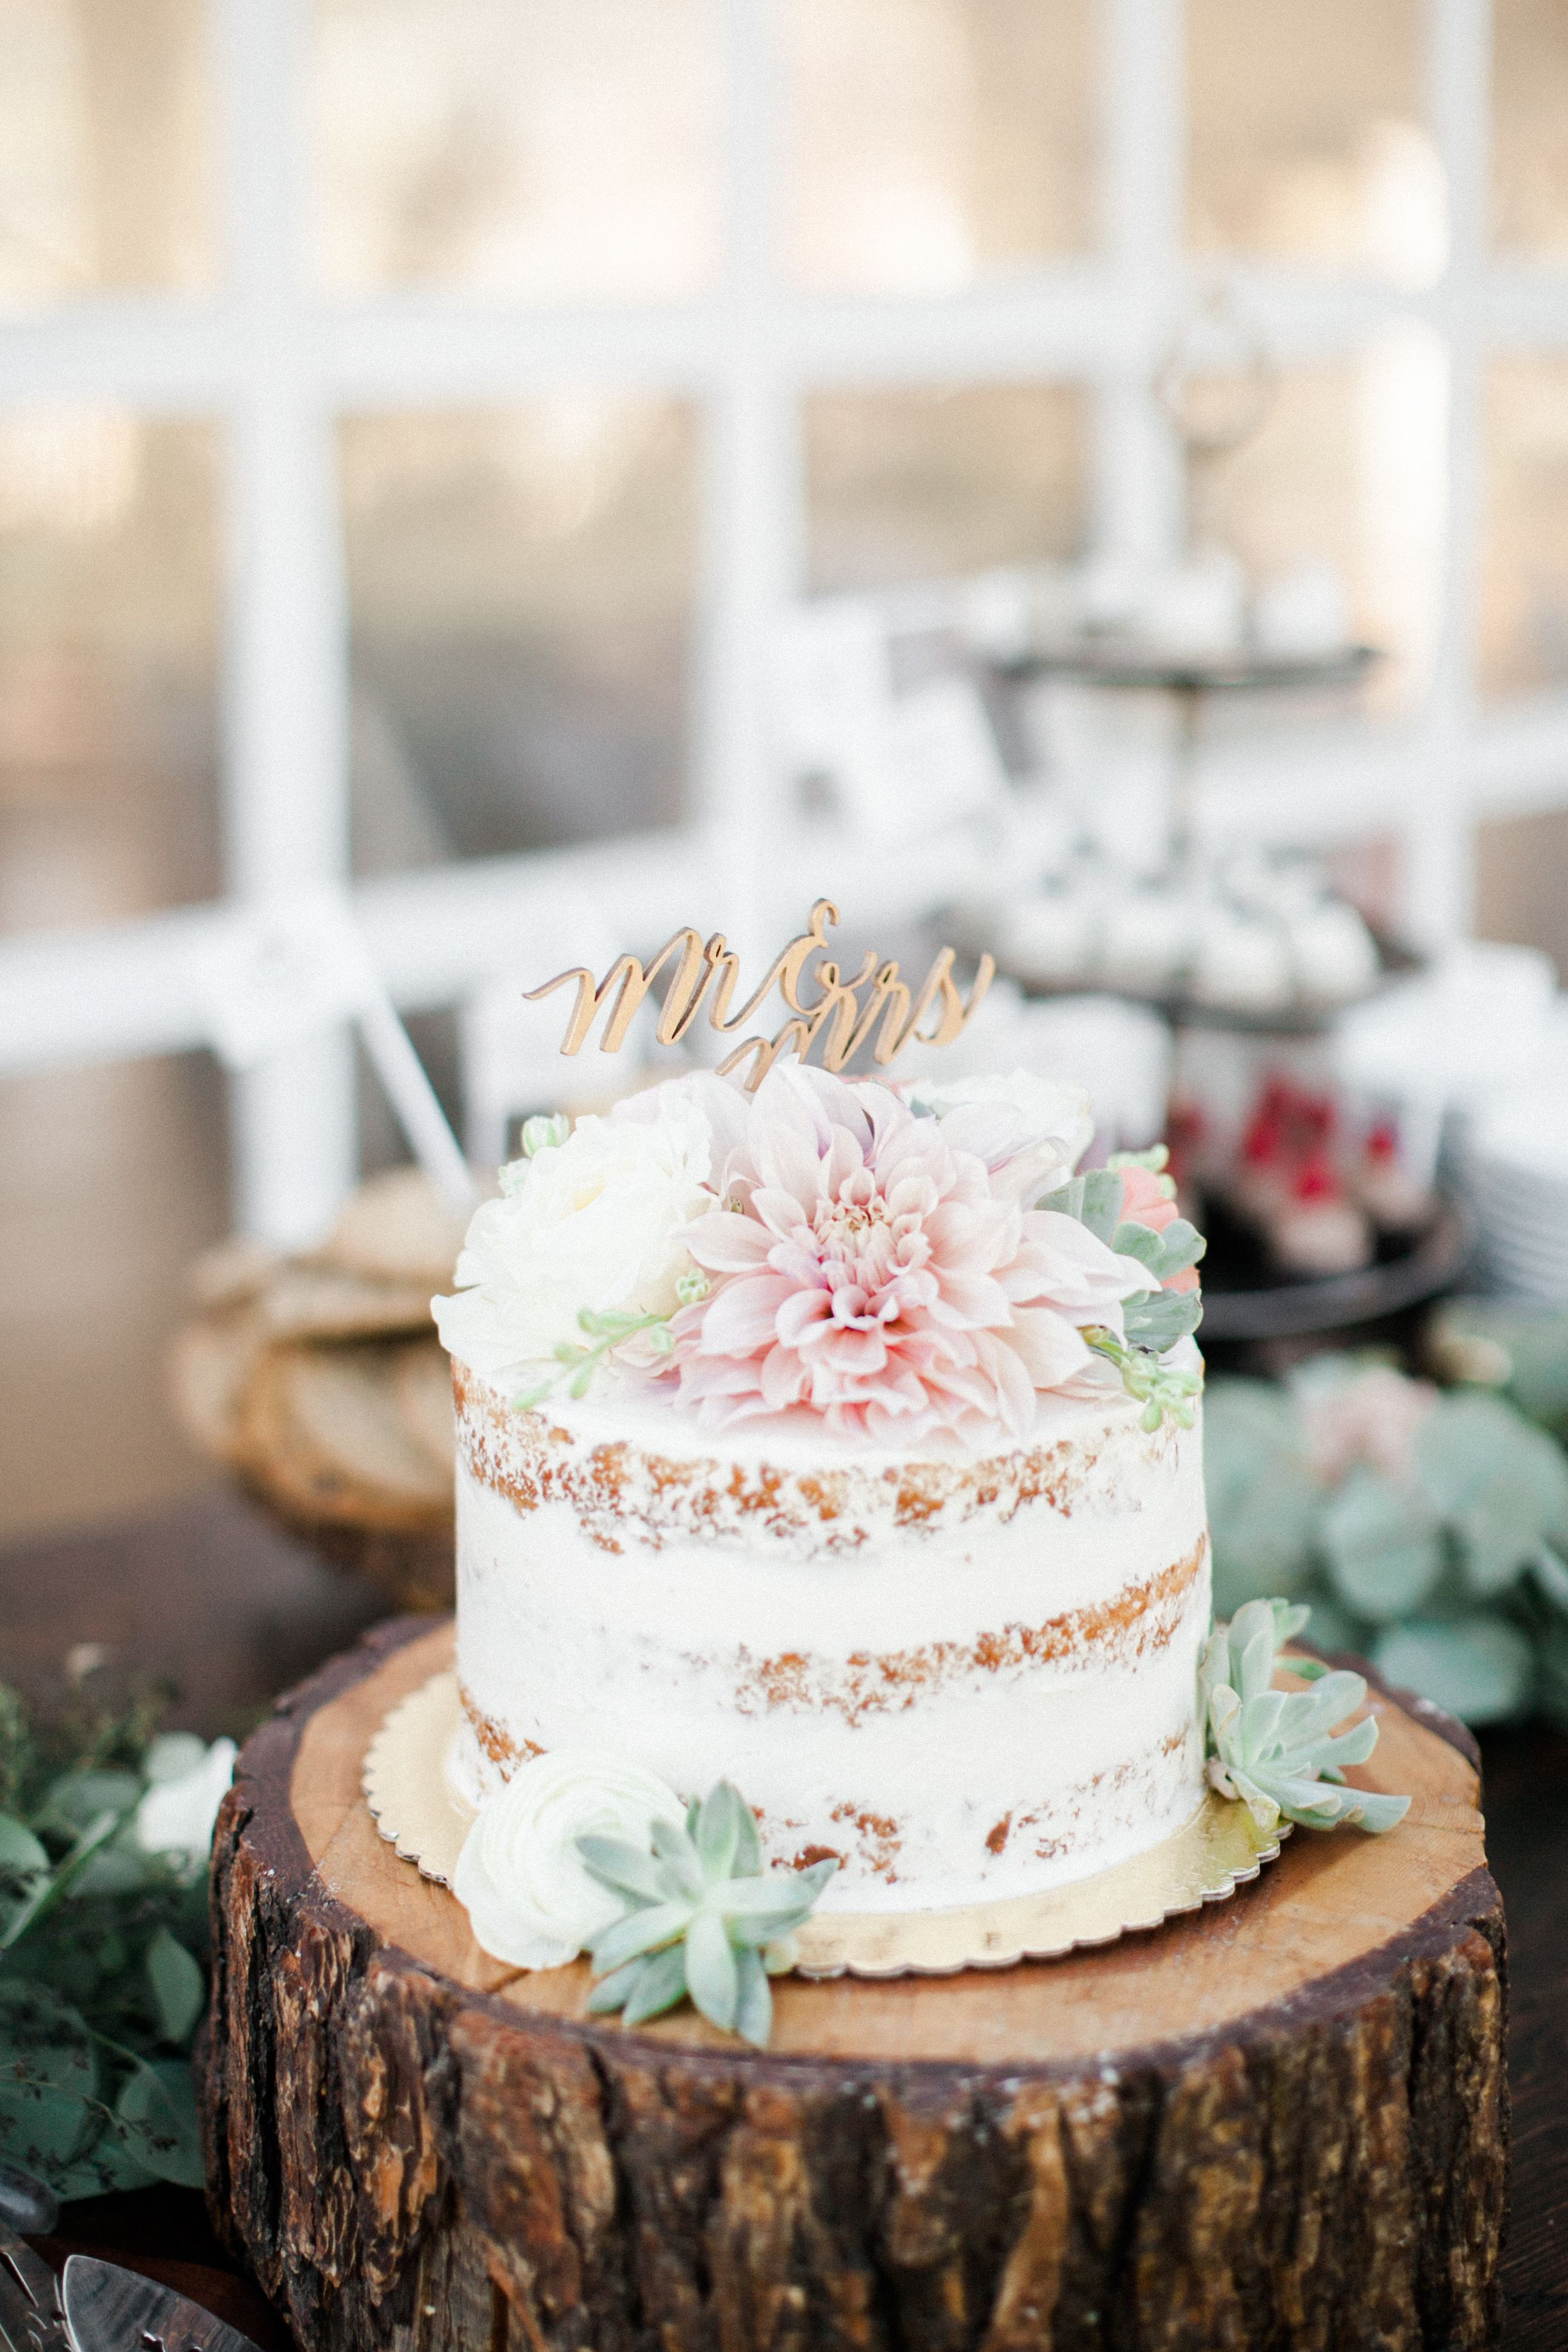 Pictures Of Small Wedding Cakes
 Simple Small Wedding Cake